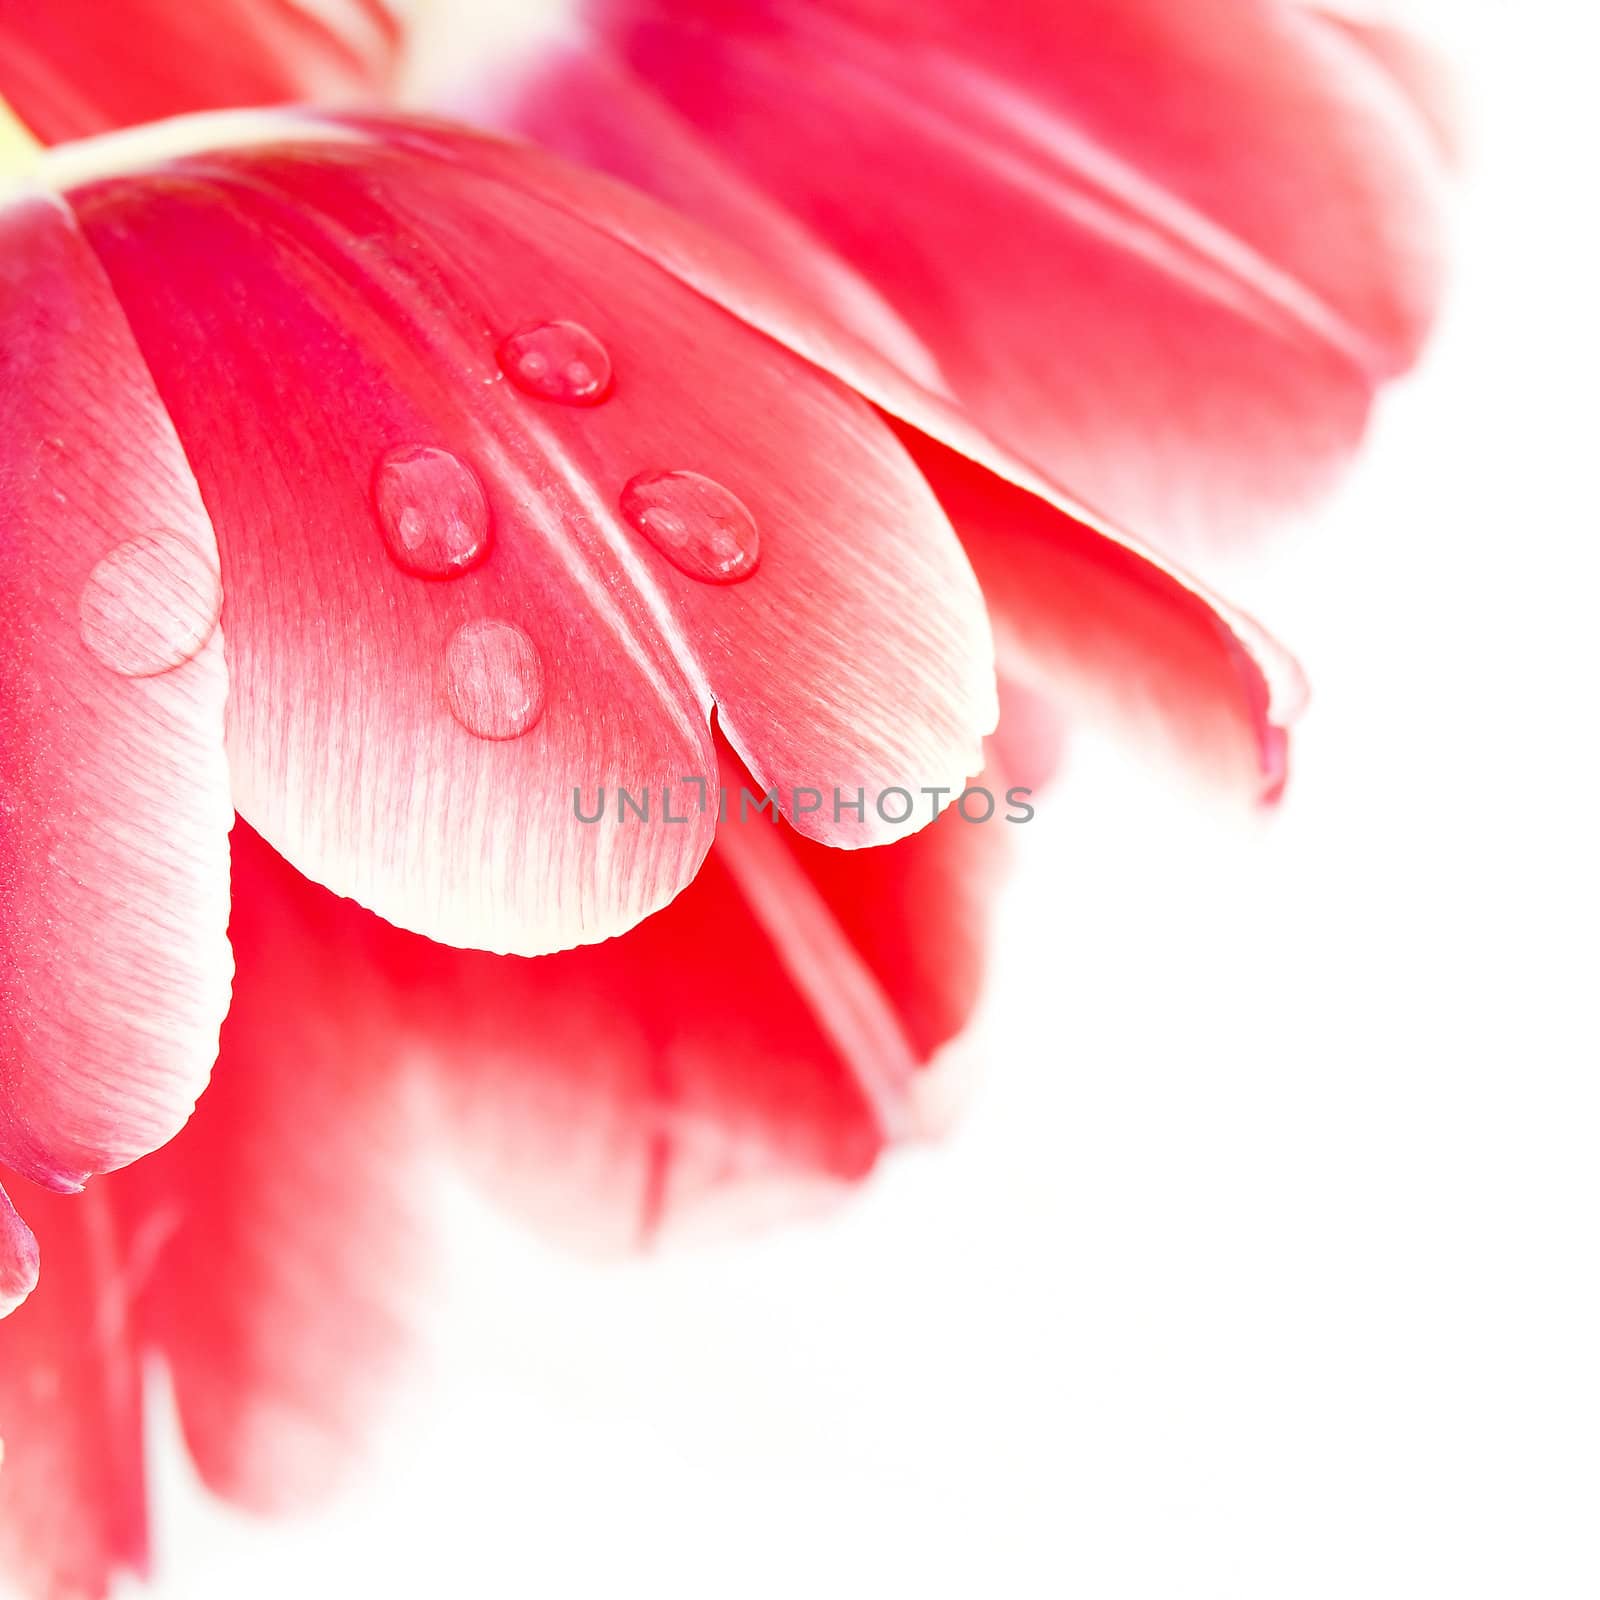 Macro shot of a water drop on red tulip petals  by miradrozdowski